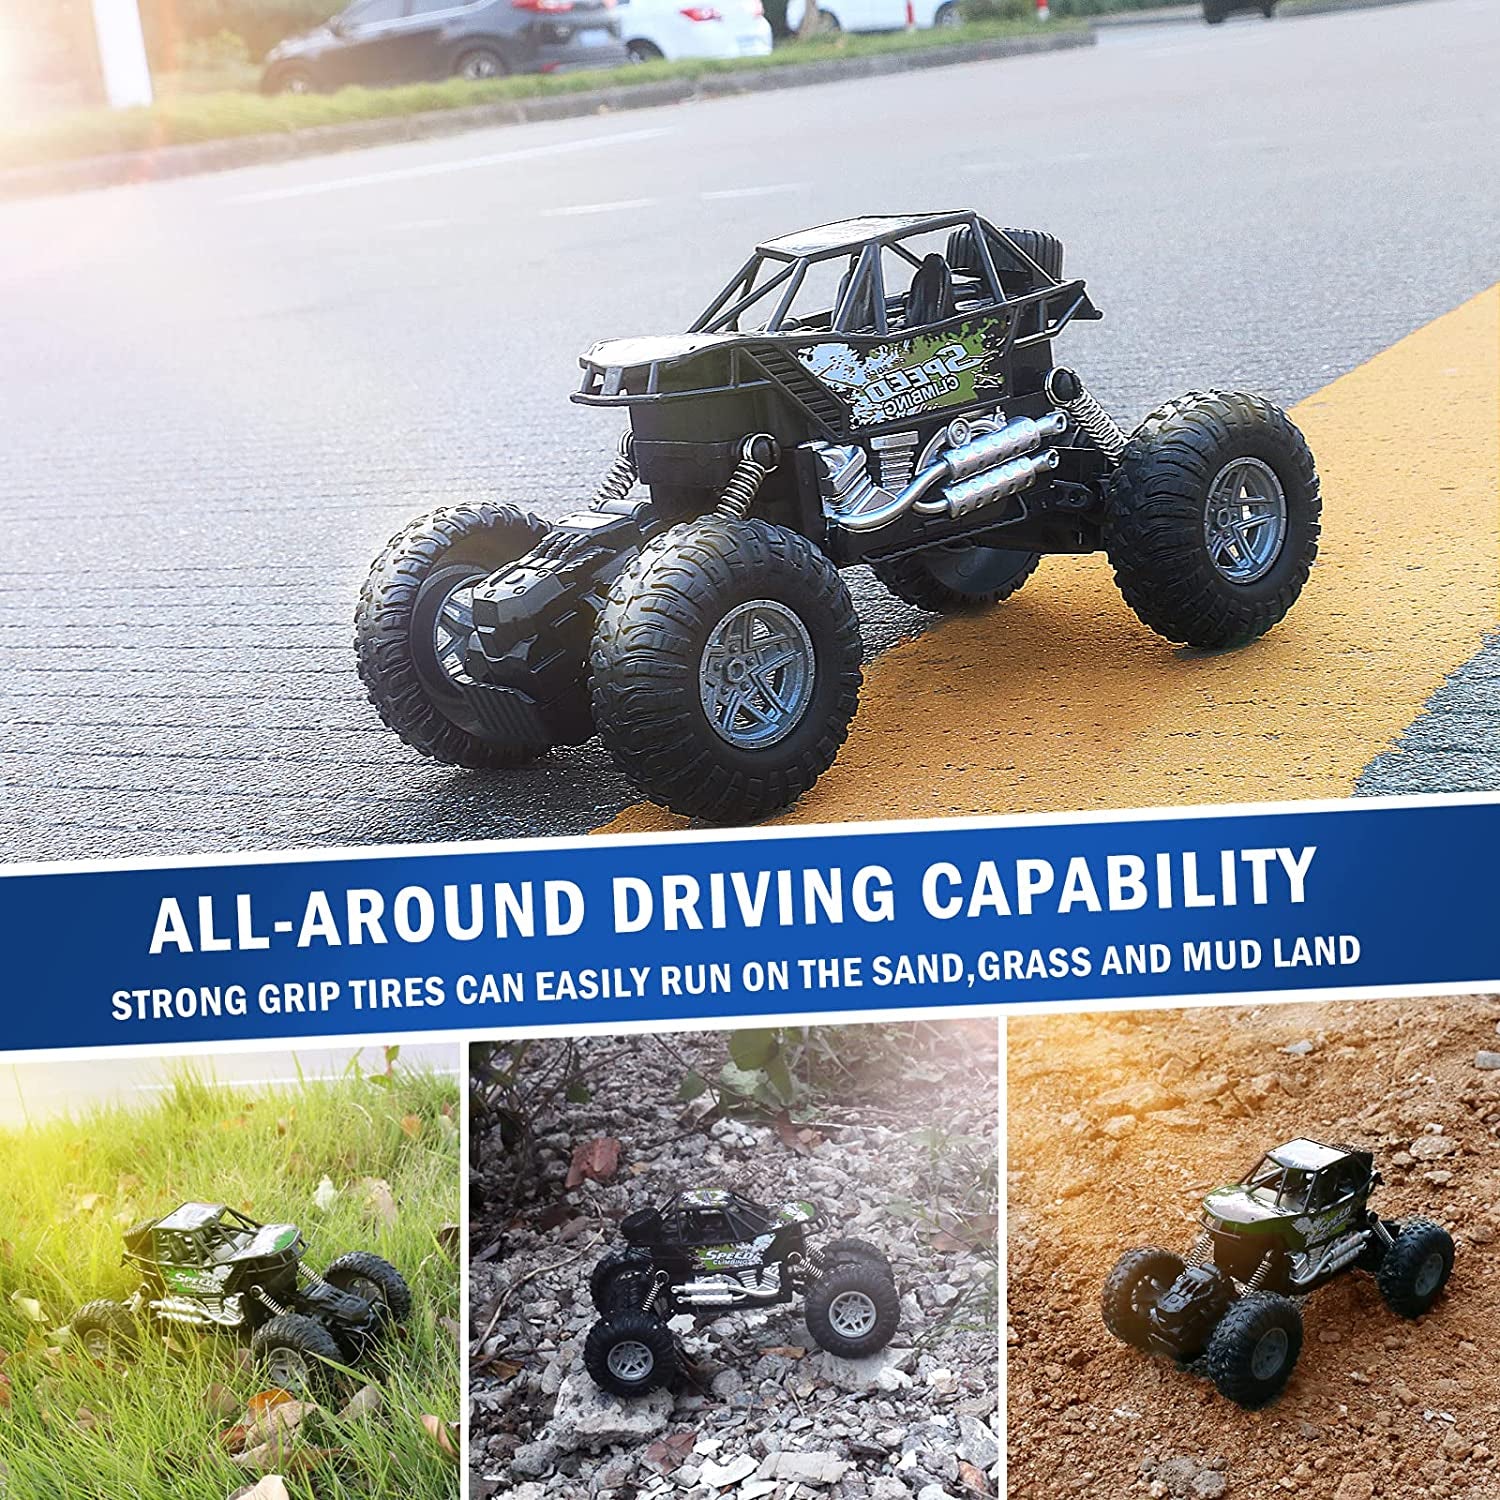 1:18 Scale RC Monster Vehicle Truck Crawler, All Terrains 4WD High Speed Electric Vehicle with Remote Control, off Road Truck with Two Rechargeable Batteries for Boys Kids and Adults (Green)